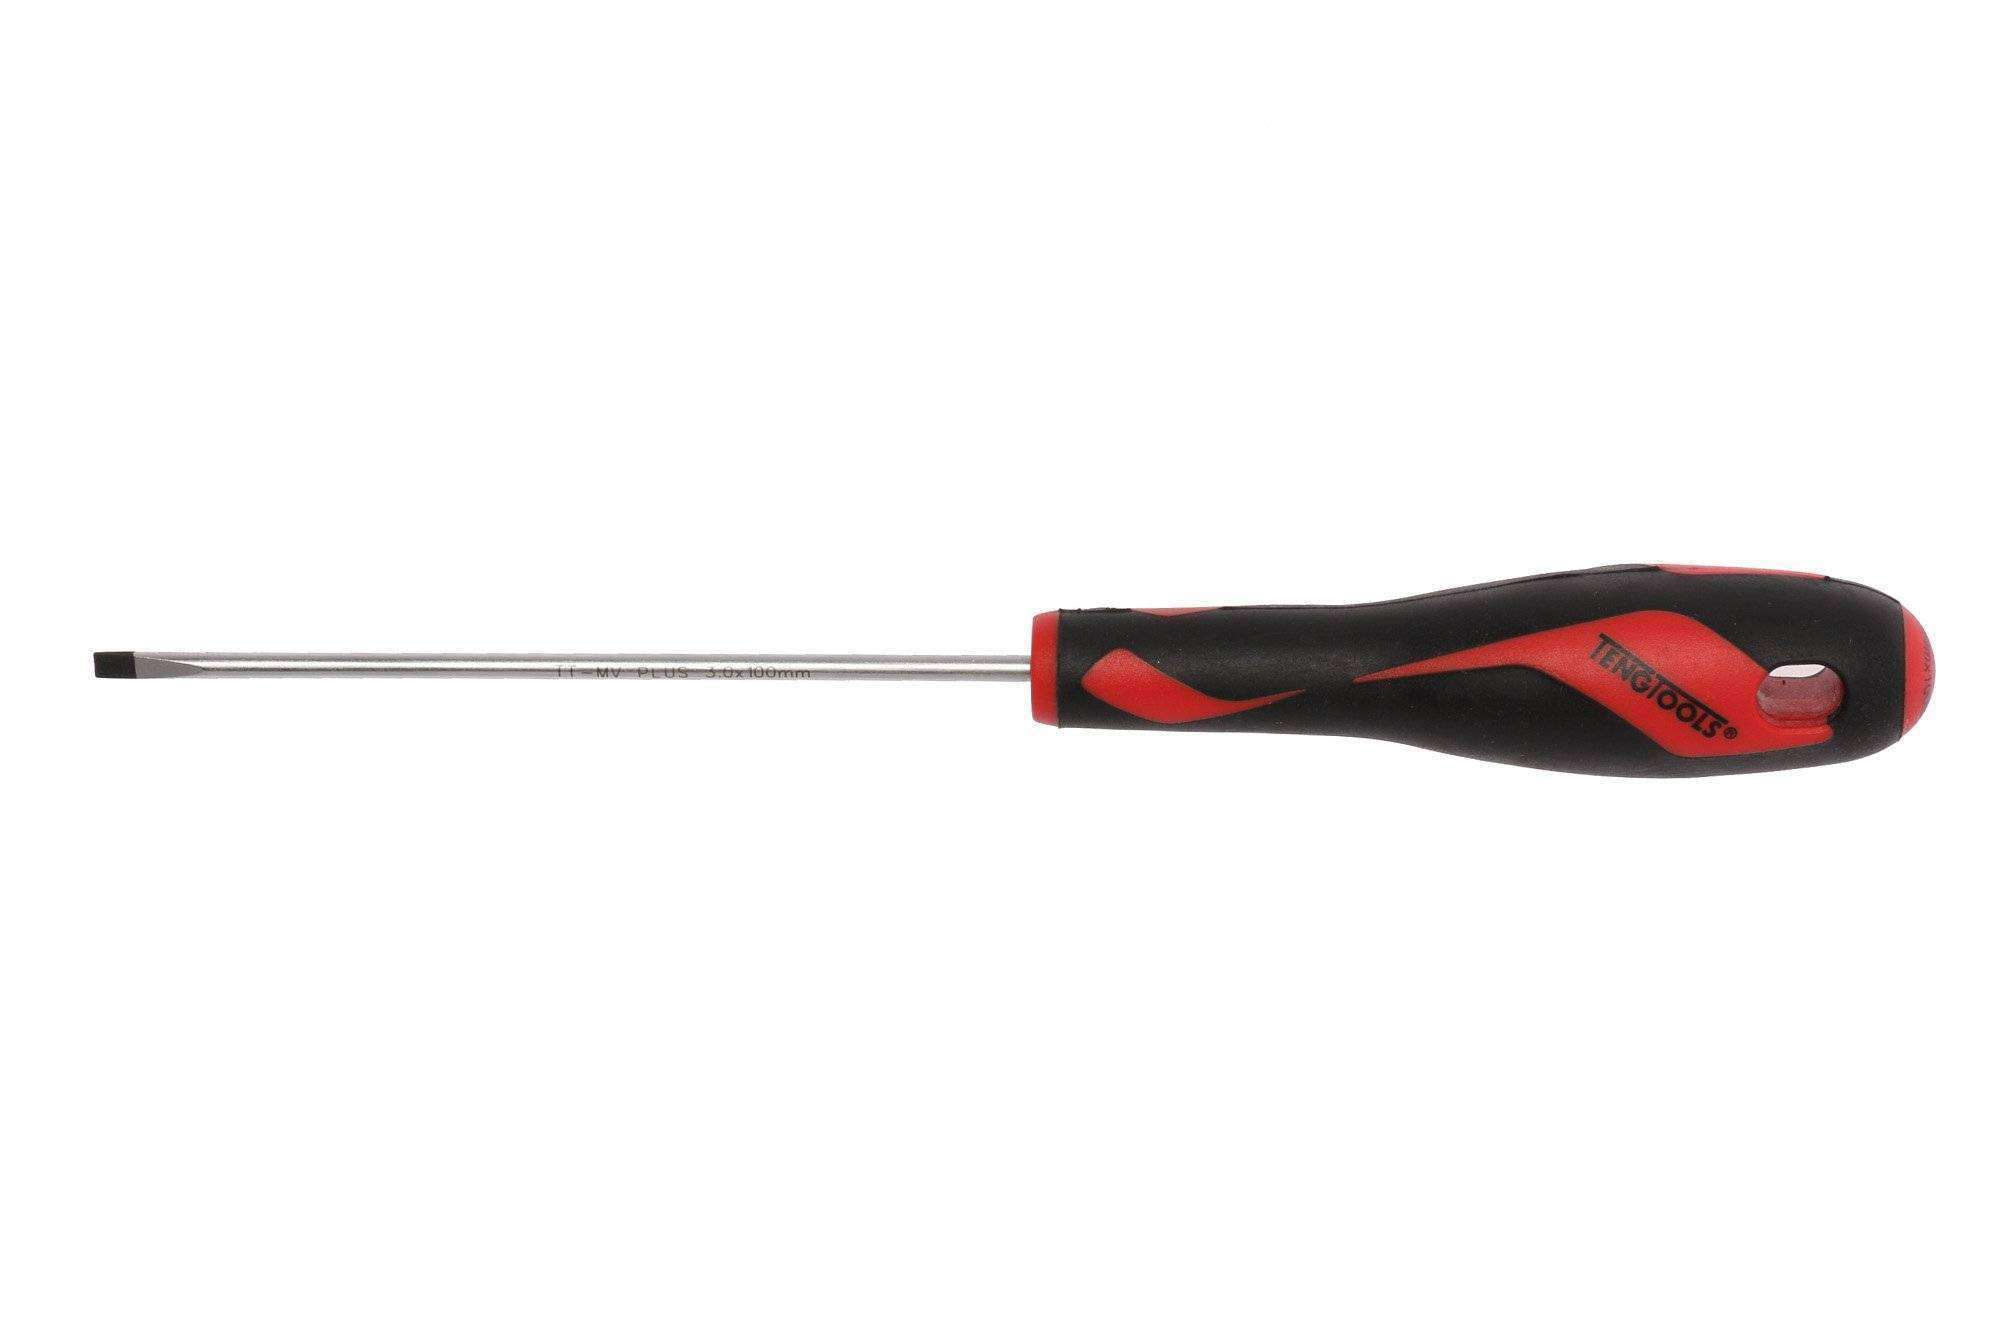 Teng Tools 3mm / 1/8 Inch X 100mm / 3.9 Inch Long Flat Type Slotted Head Screwdriver - MD920N1